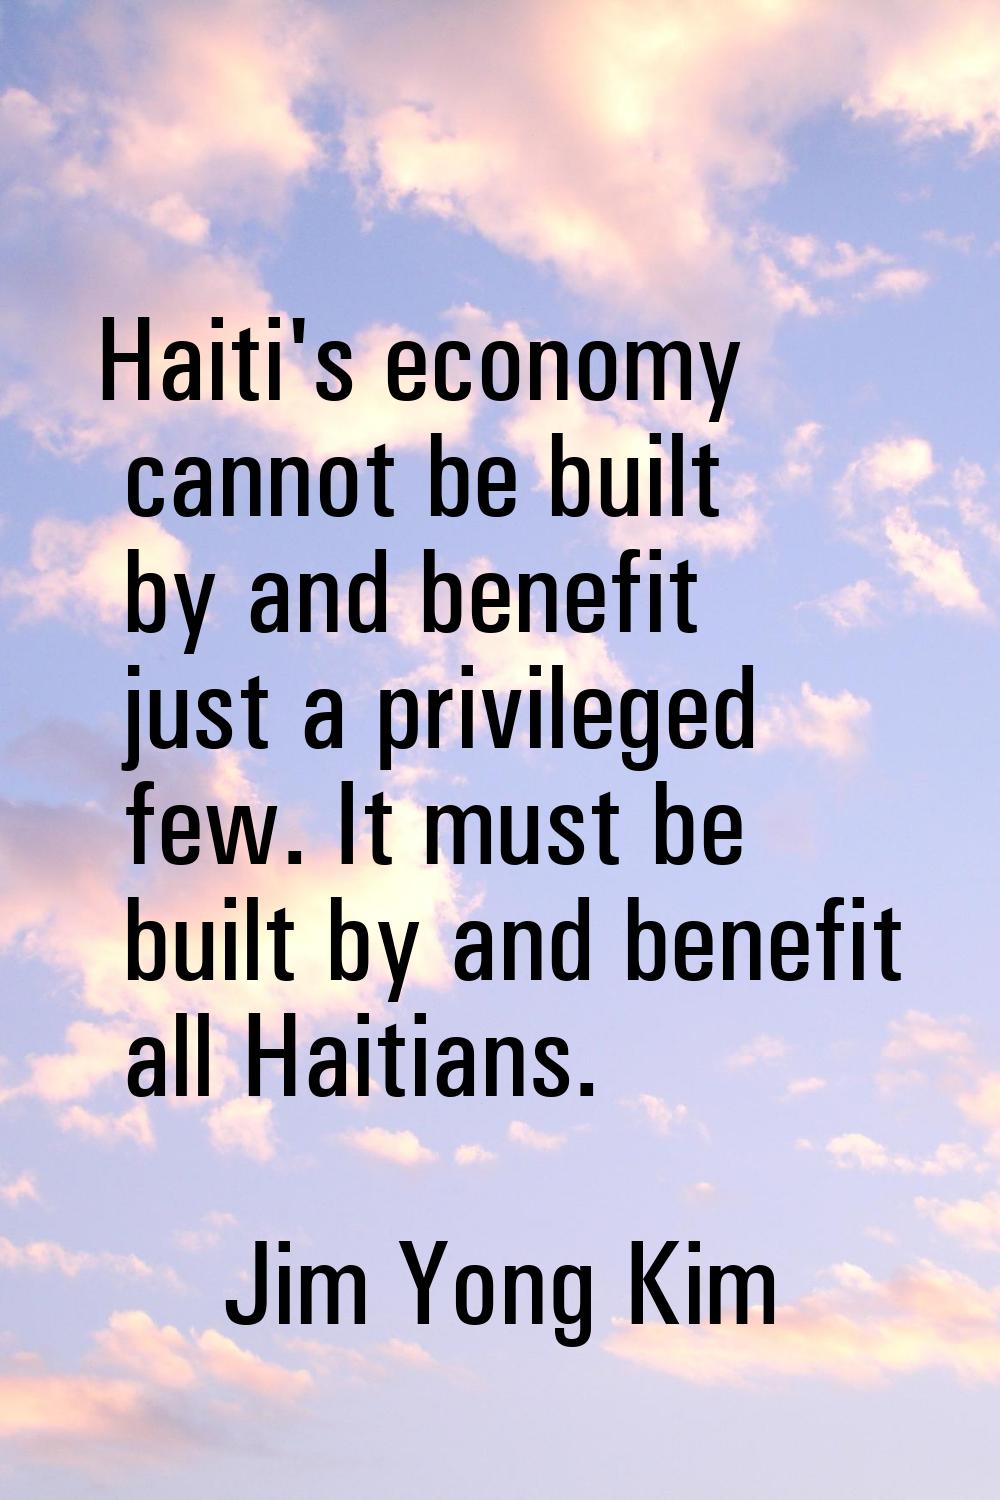 Haiti's economy cannot be built by and benefit just a privileged few. It must be built by and benef